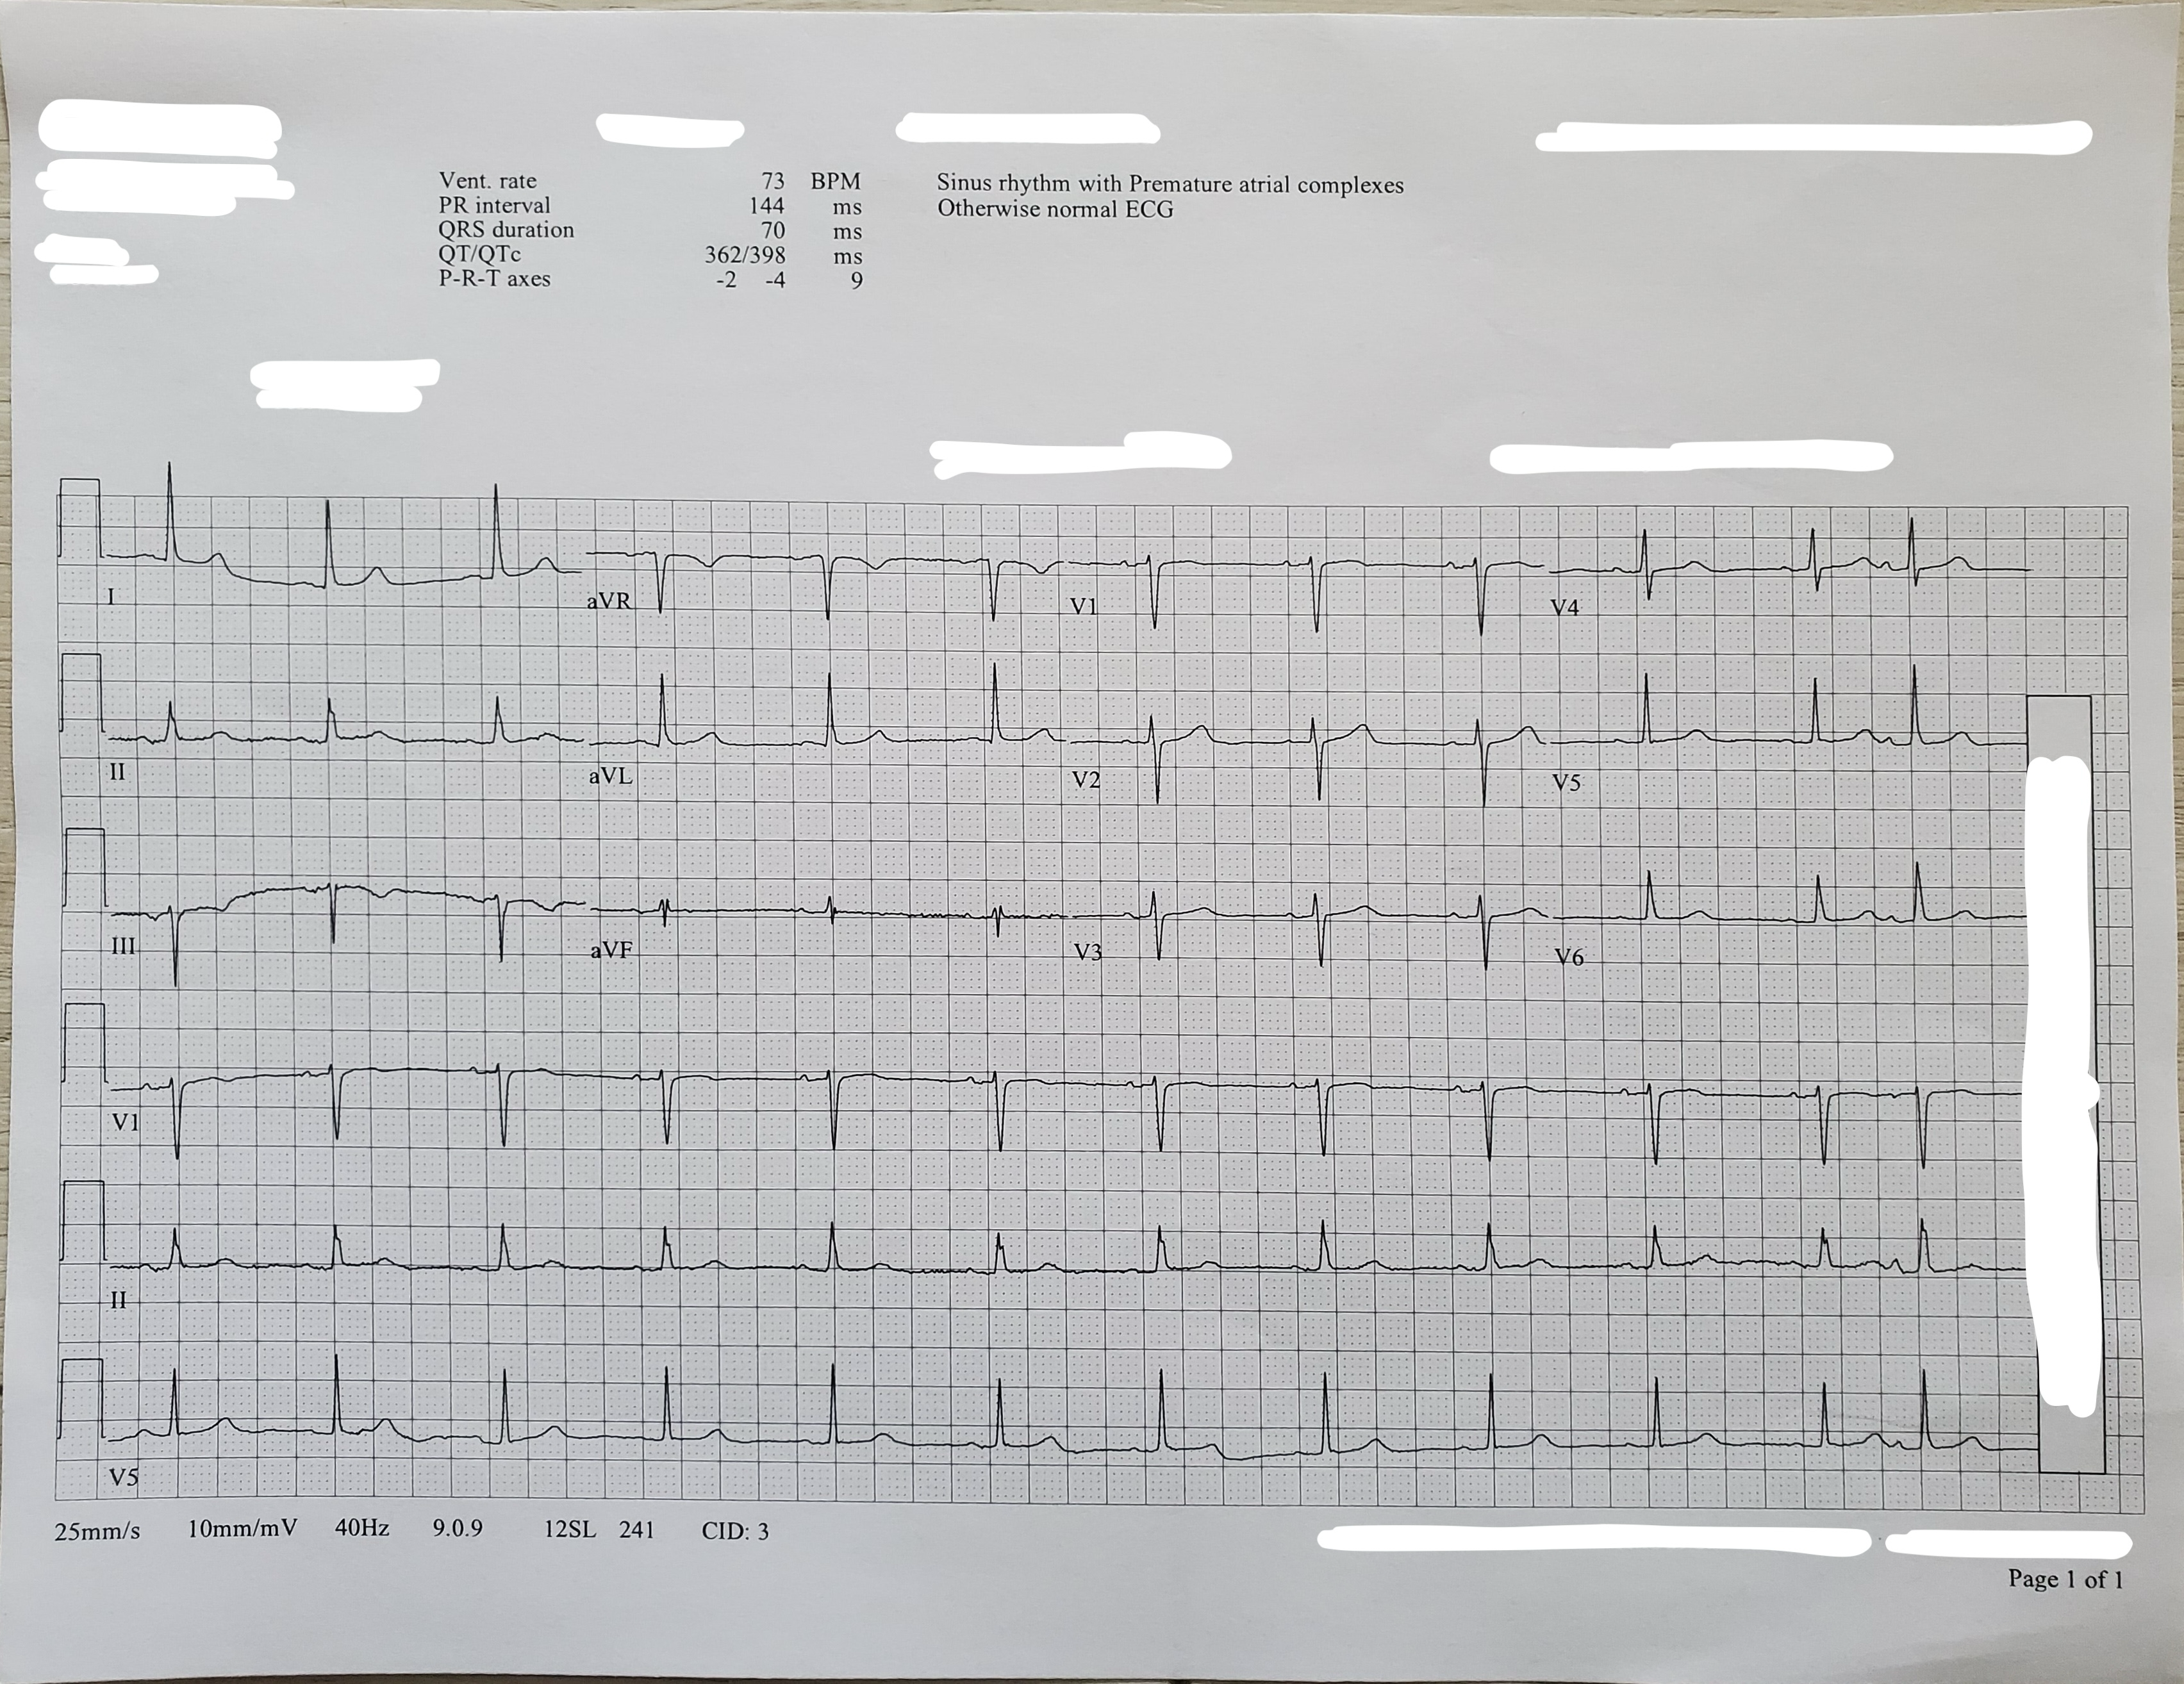 Example of an ECG image.